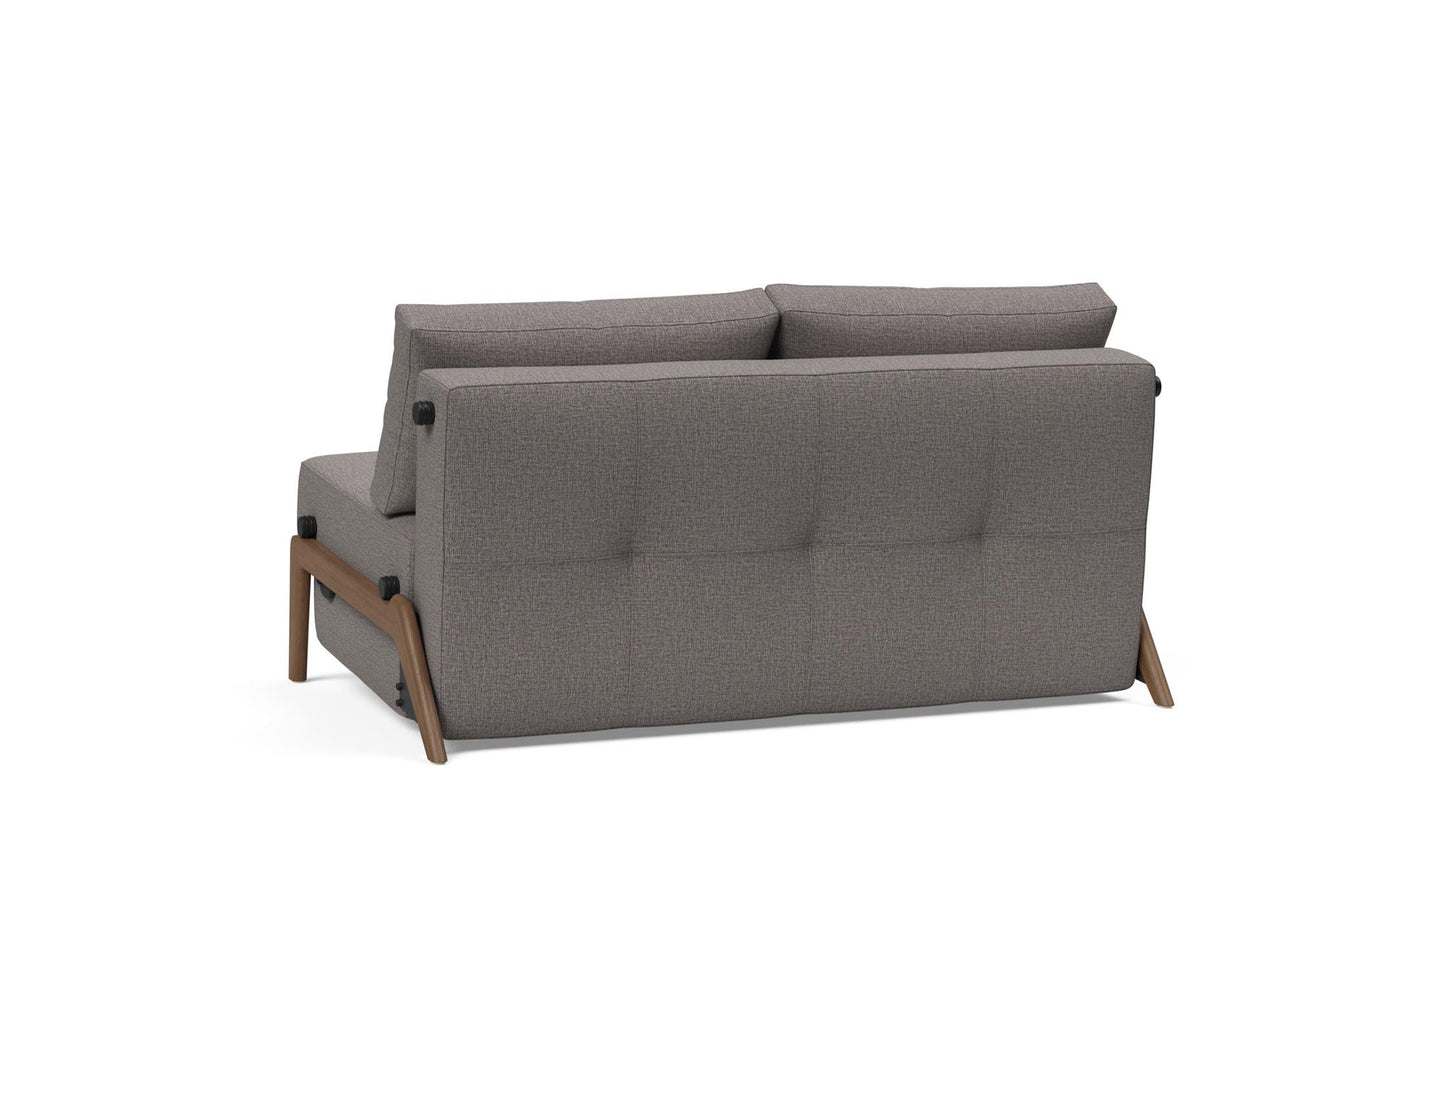 Innovation Living Cubed Full Sofa Bed with Dark Wood Legs